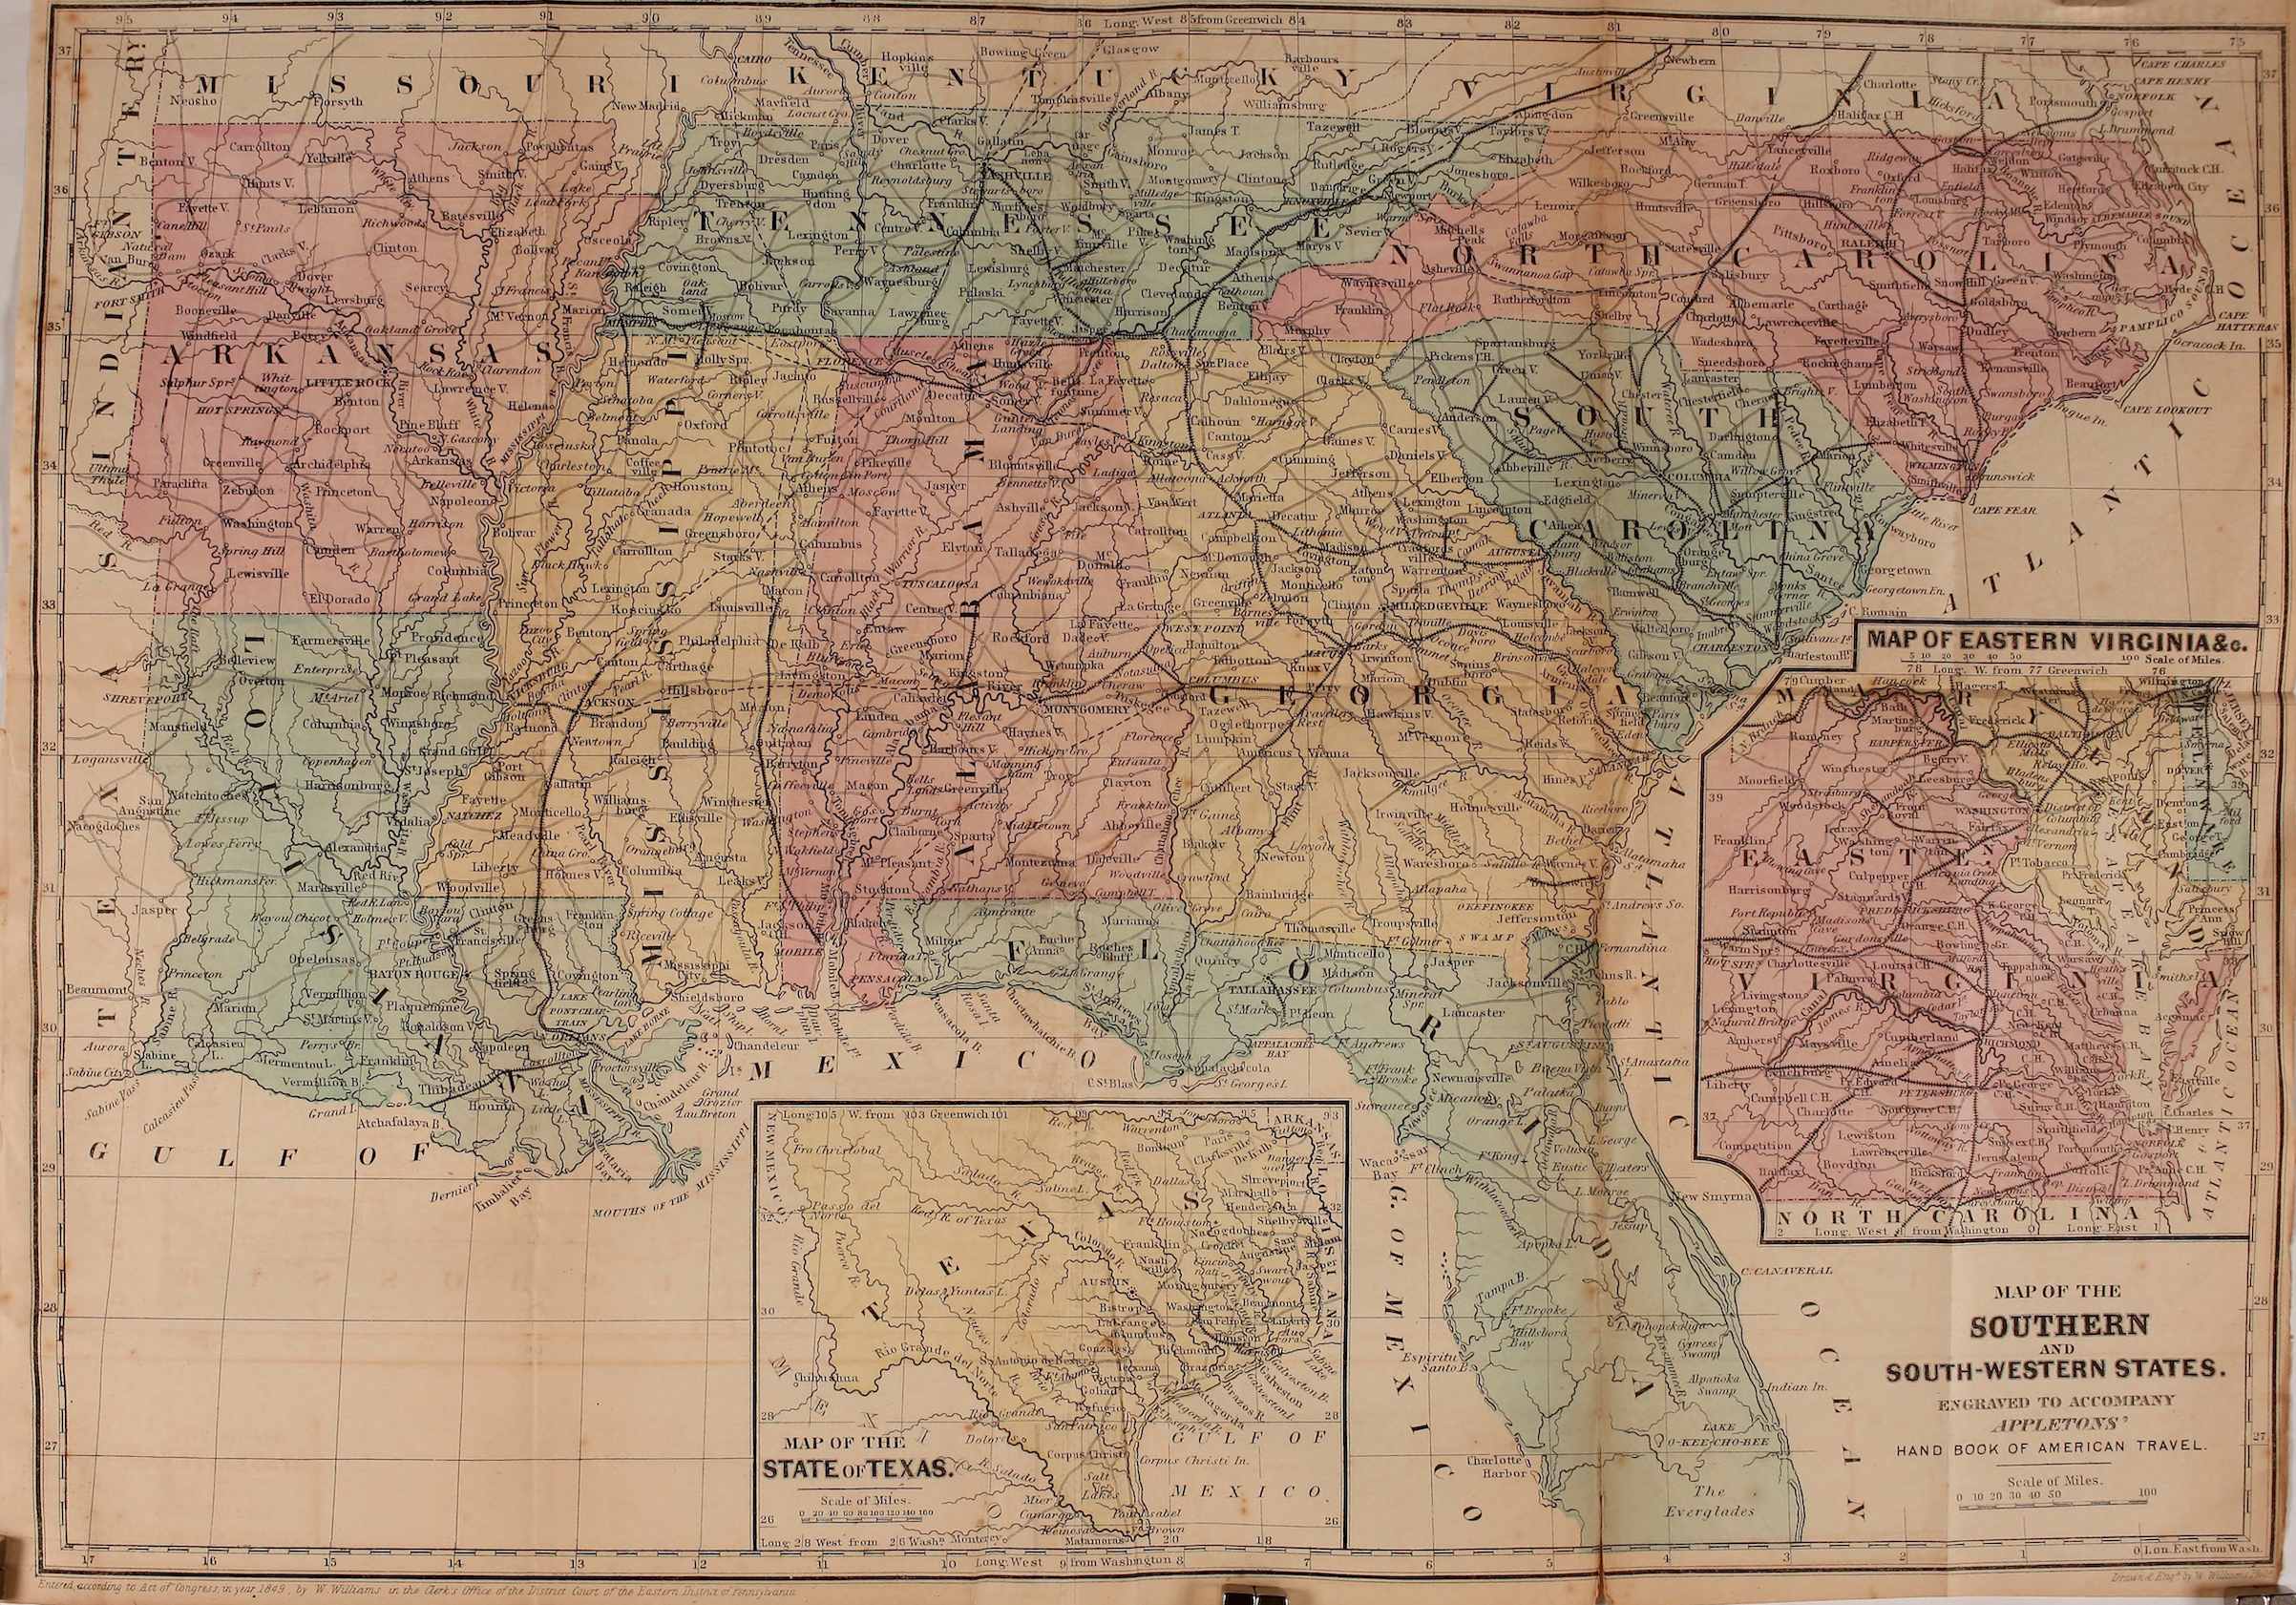 Color, political and physical map of the Southern and South-Western States, with insets illustrating Texas and the Eastern Virginias, 1857. (Smith Collection/Gado/Getty Images)